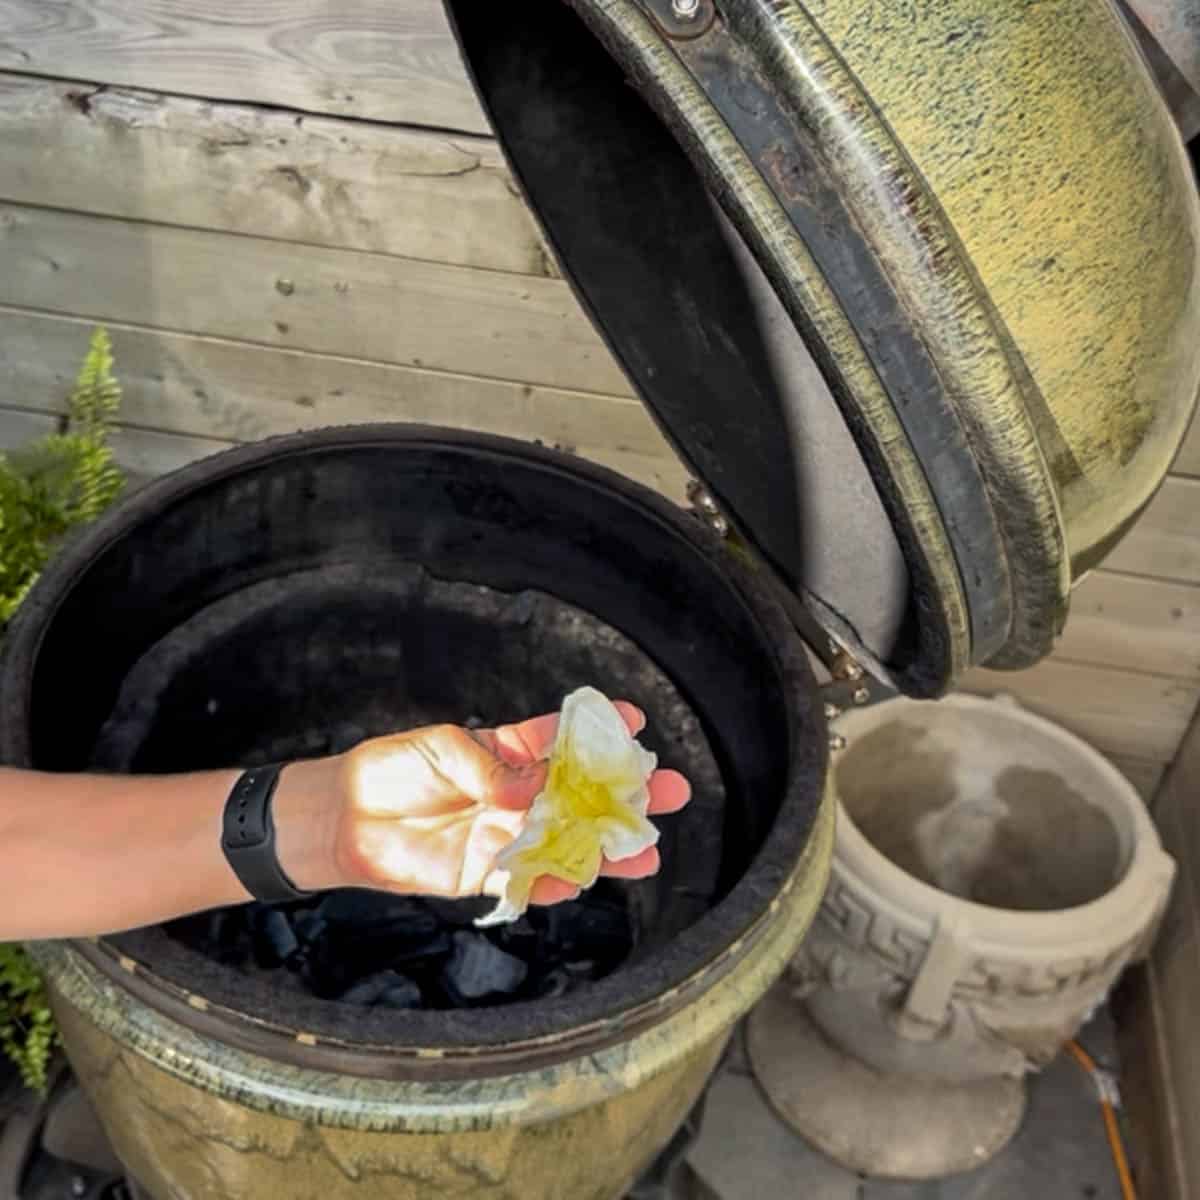 Paper towel soaked with olive oil for lighting a smoker or grill.